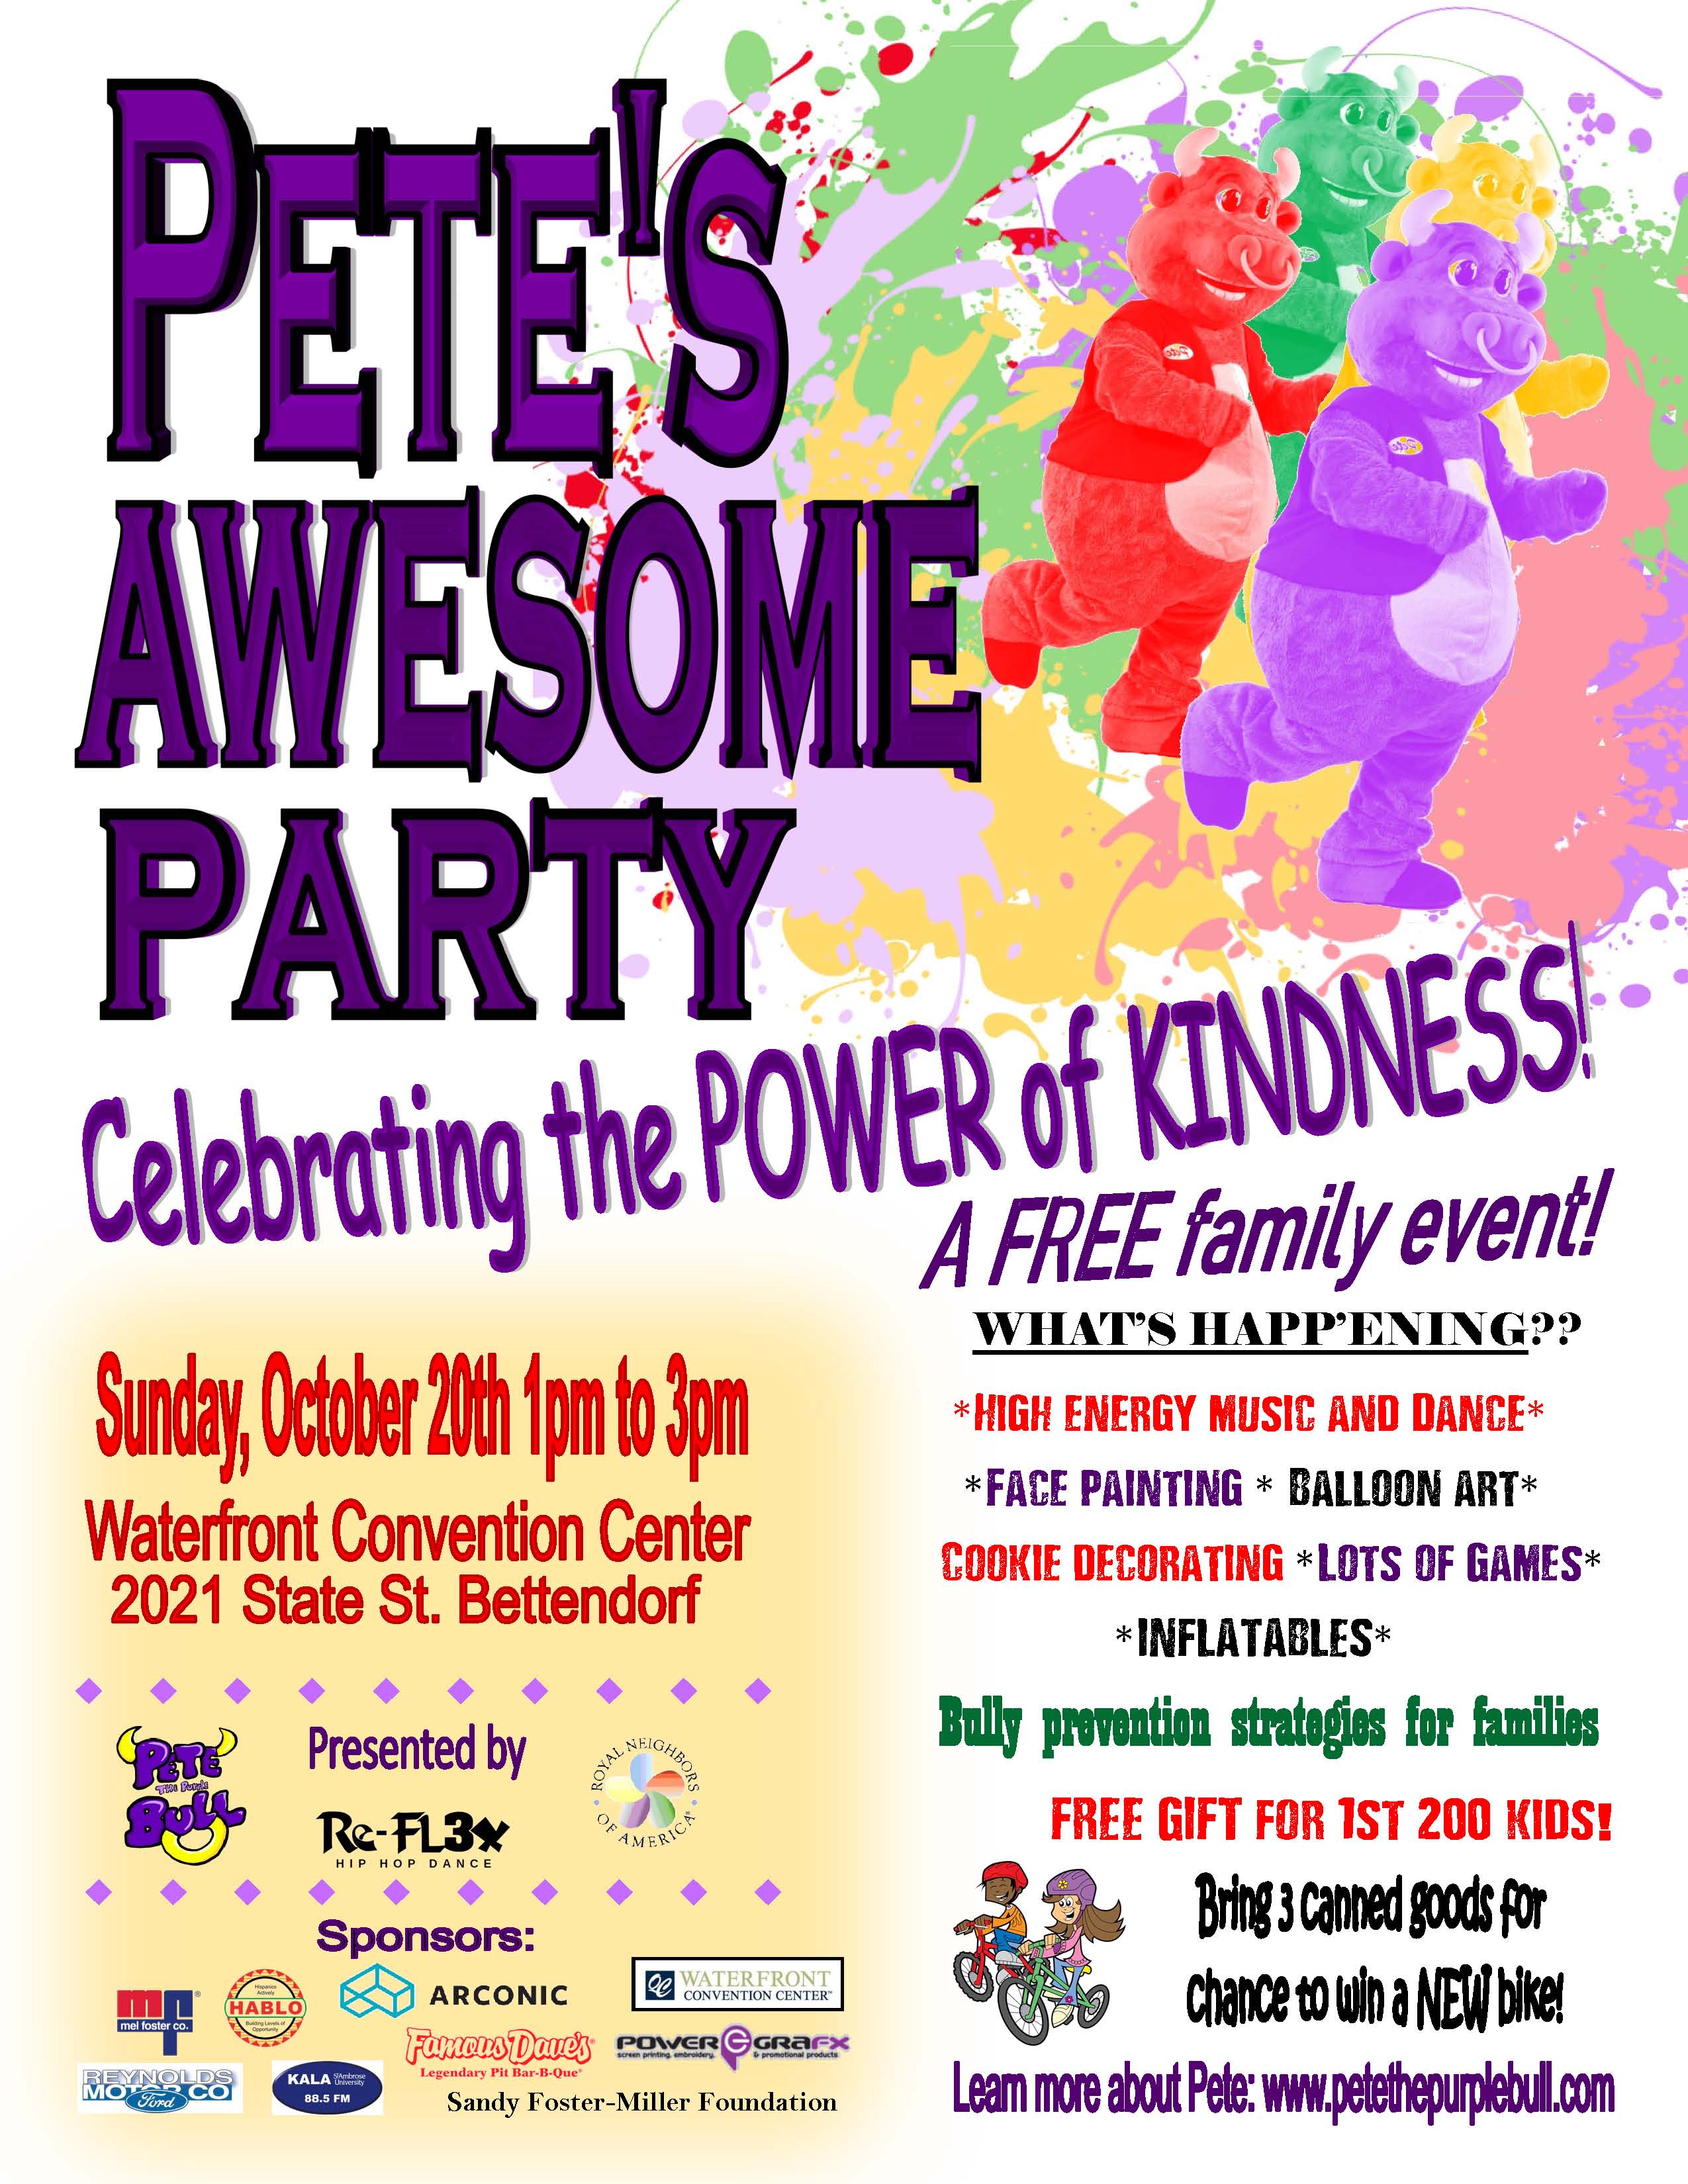 Pete's Awesome Party